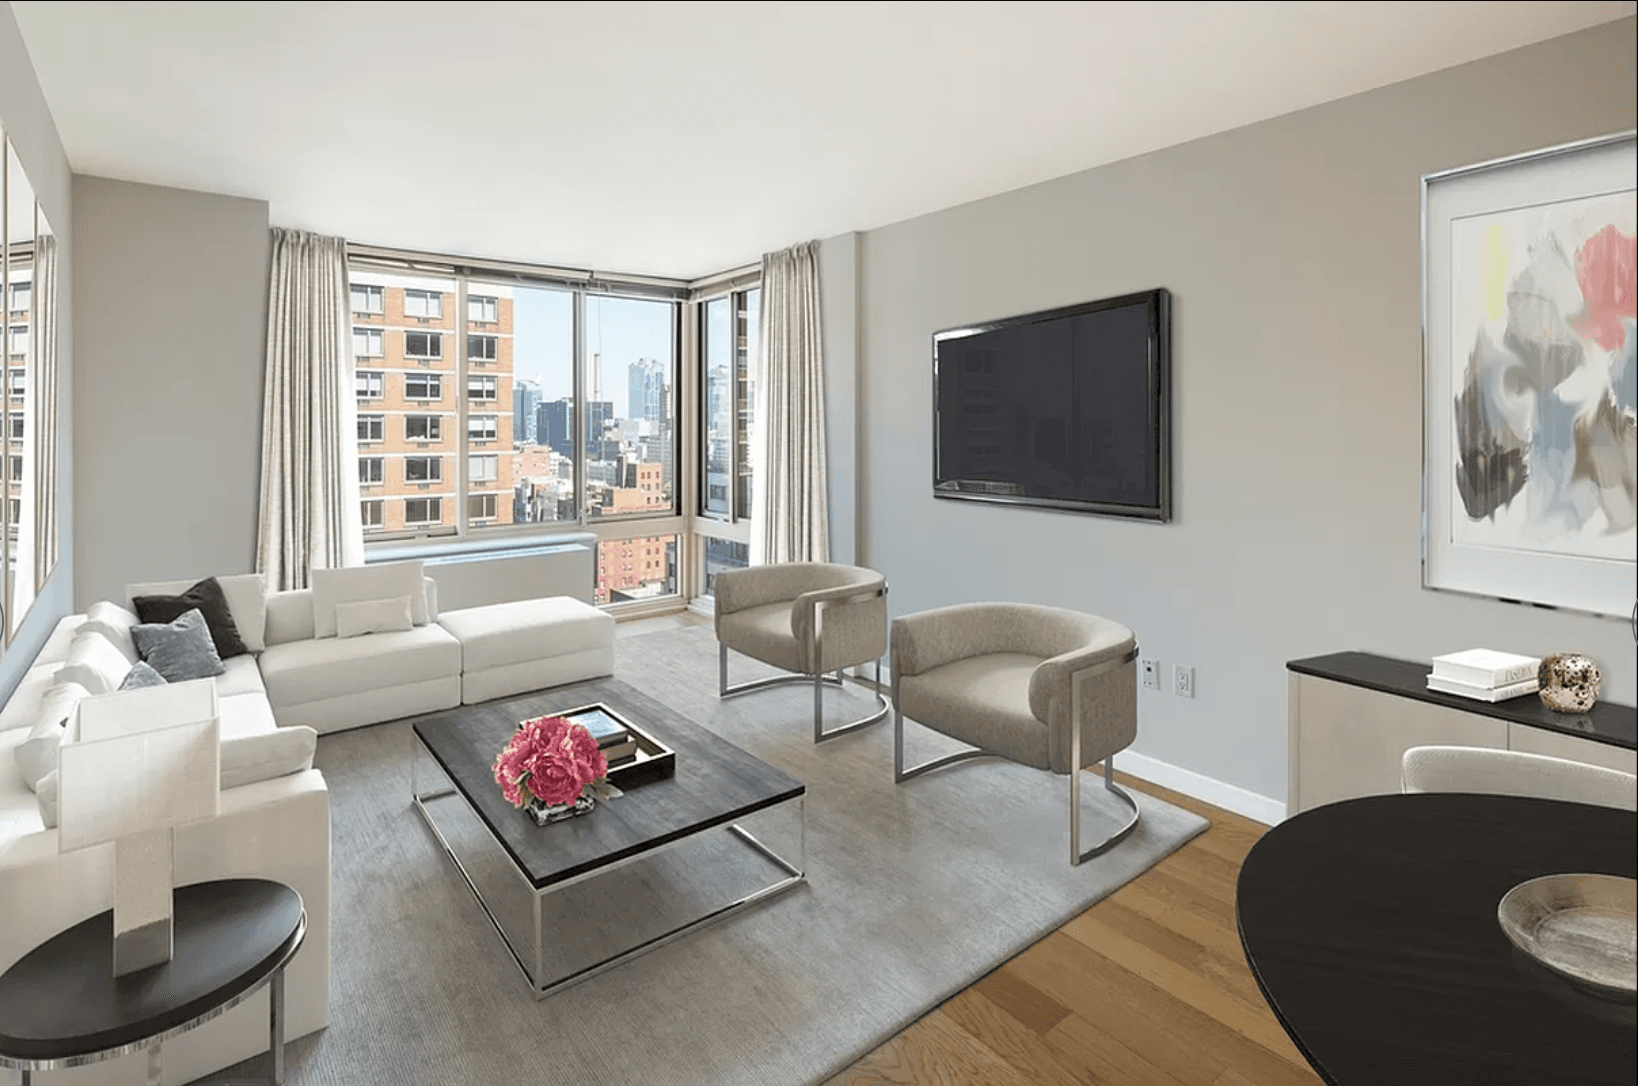 Renovated 1 Bed/1 Bath in Midtown West Luxury Apartment, North West Exposure W/ Stunning Panoramic Views of the City, Valet Services Including Dry Cleaning, Laundry & Housekeeping